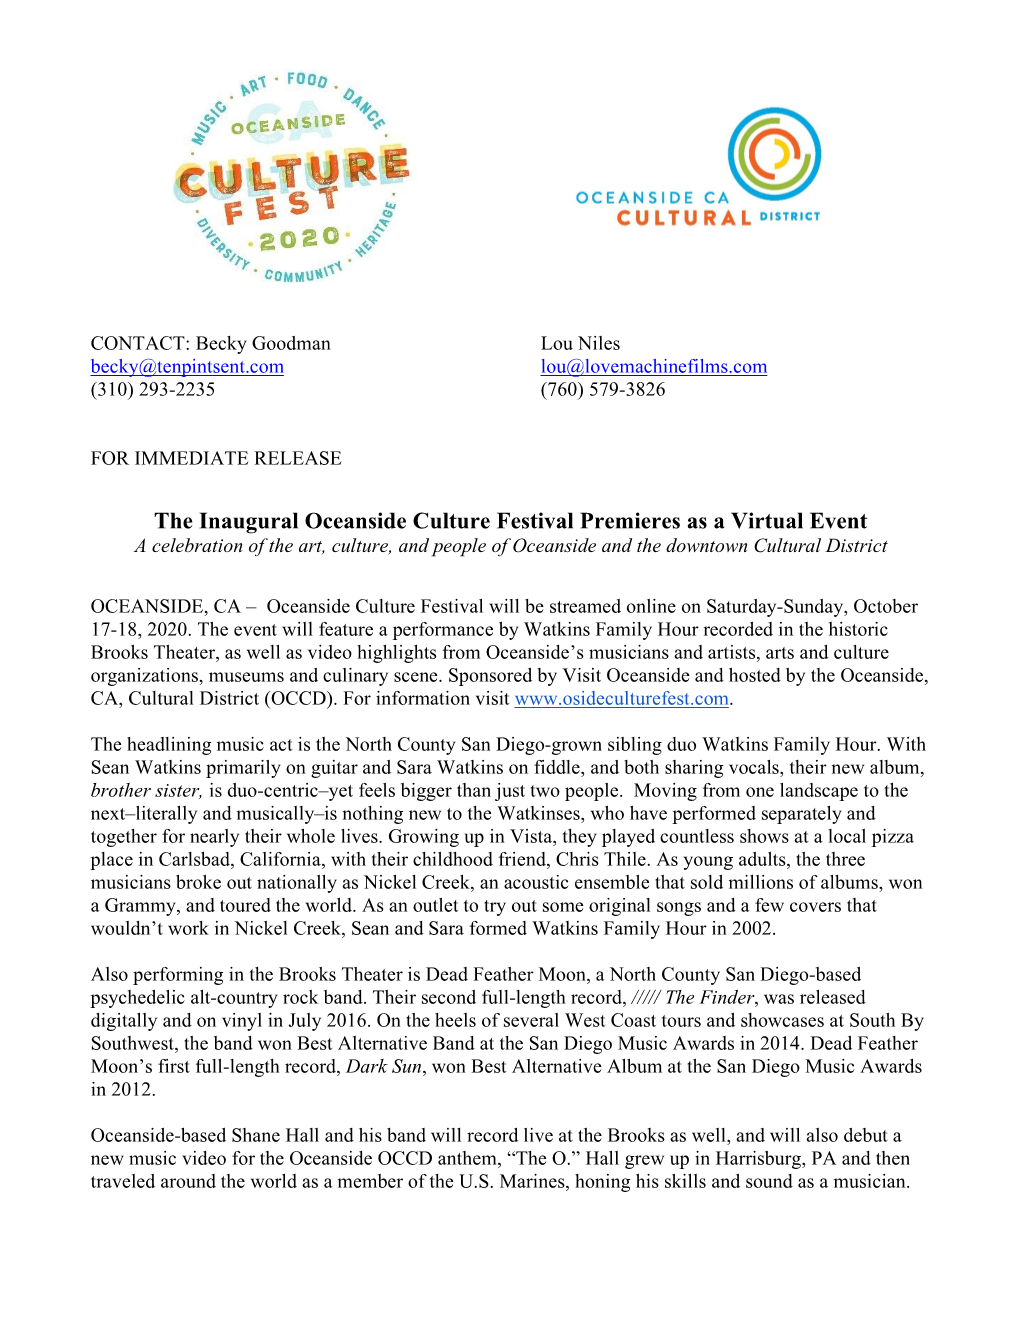 The Inaugural Oceanside Culture Festival Premieres As a Virtual Event a Celebration of the Art, Culture, and People of Oceanside and the Downtown Cultural District